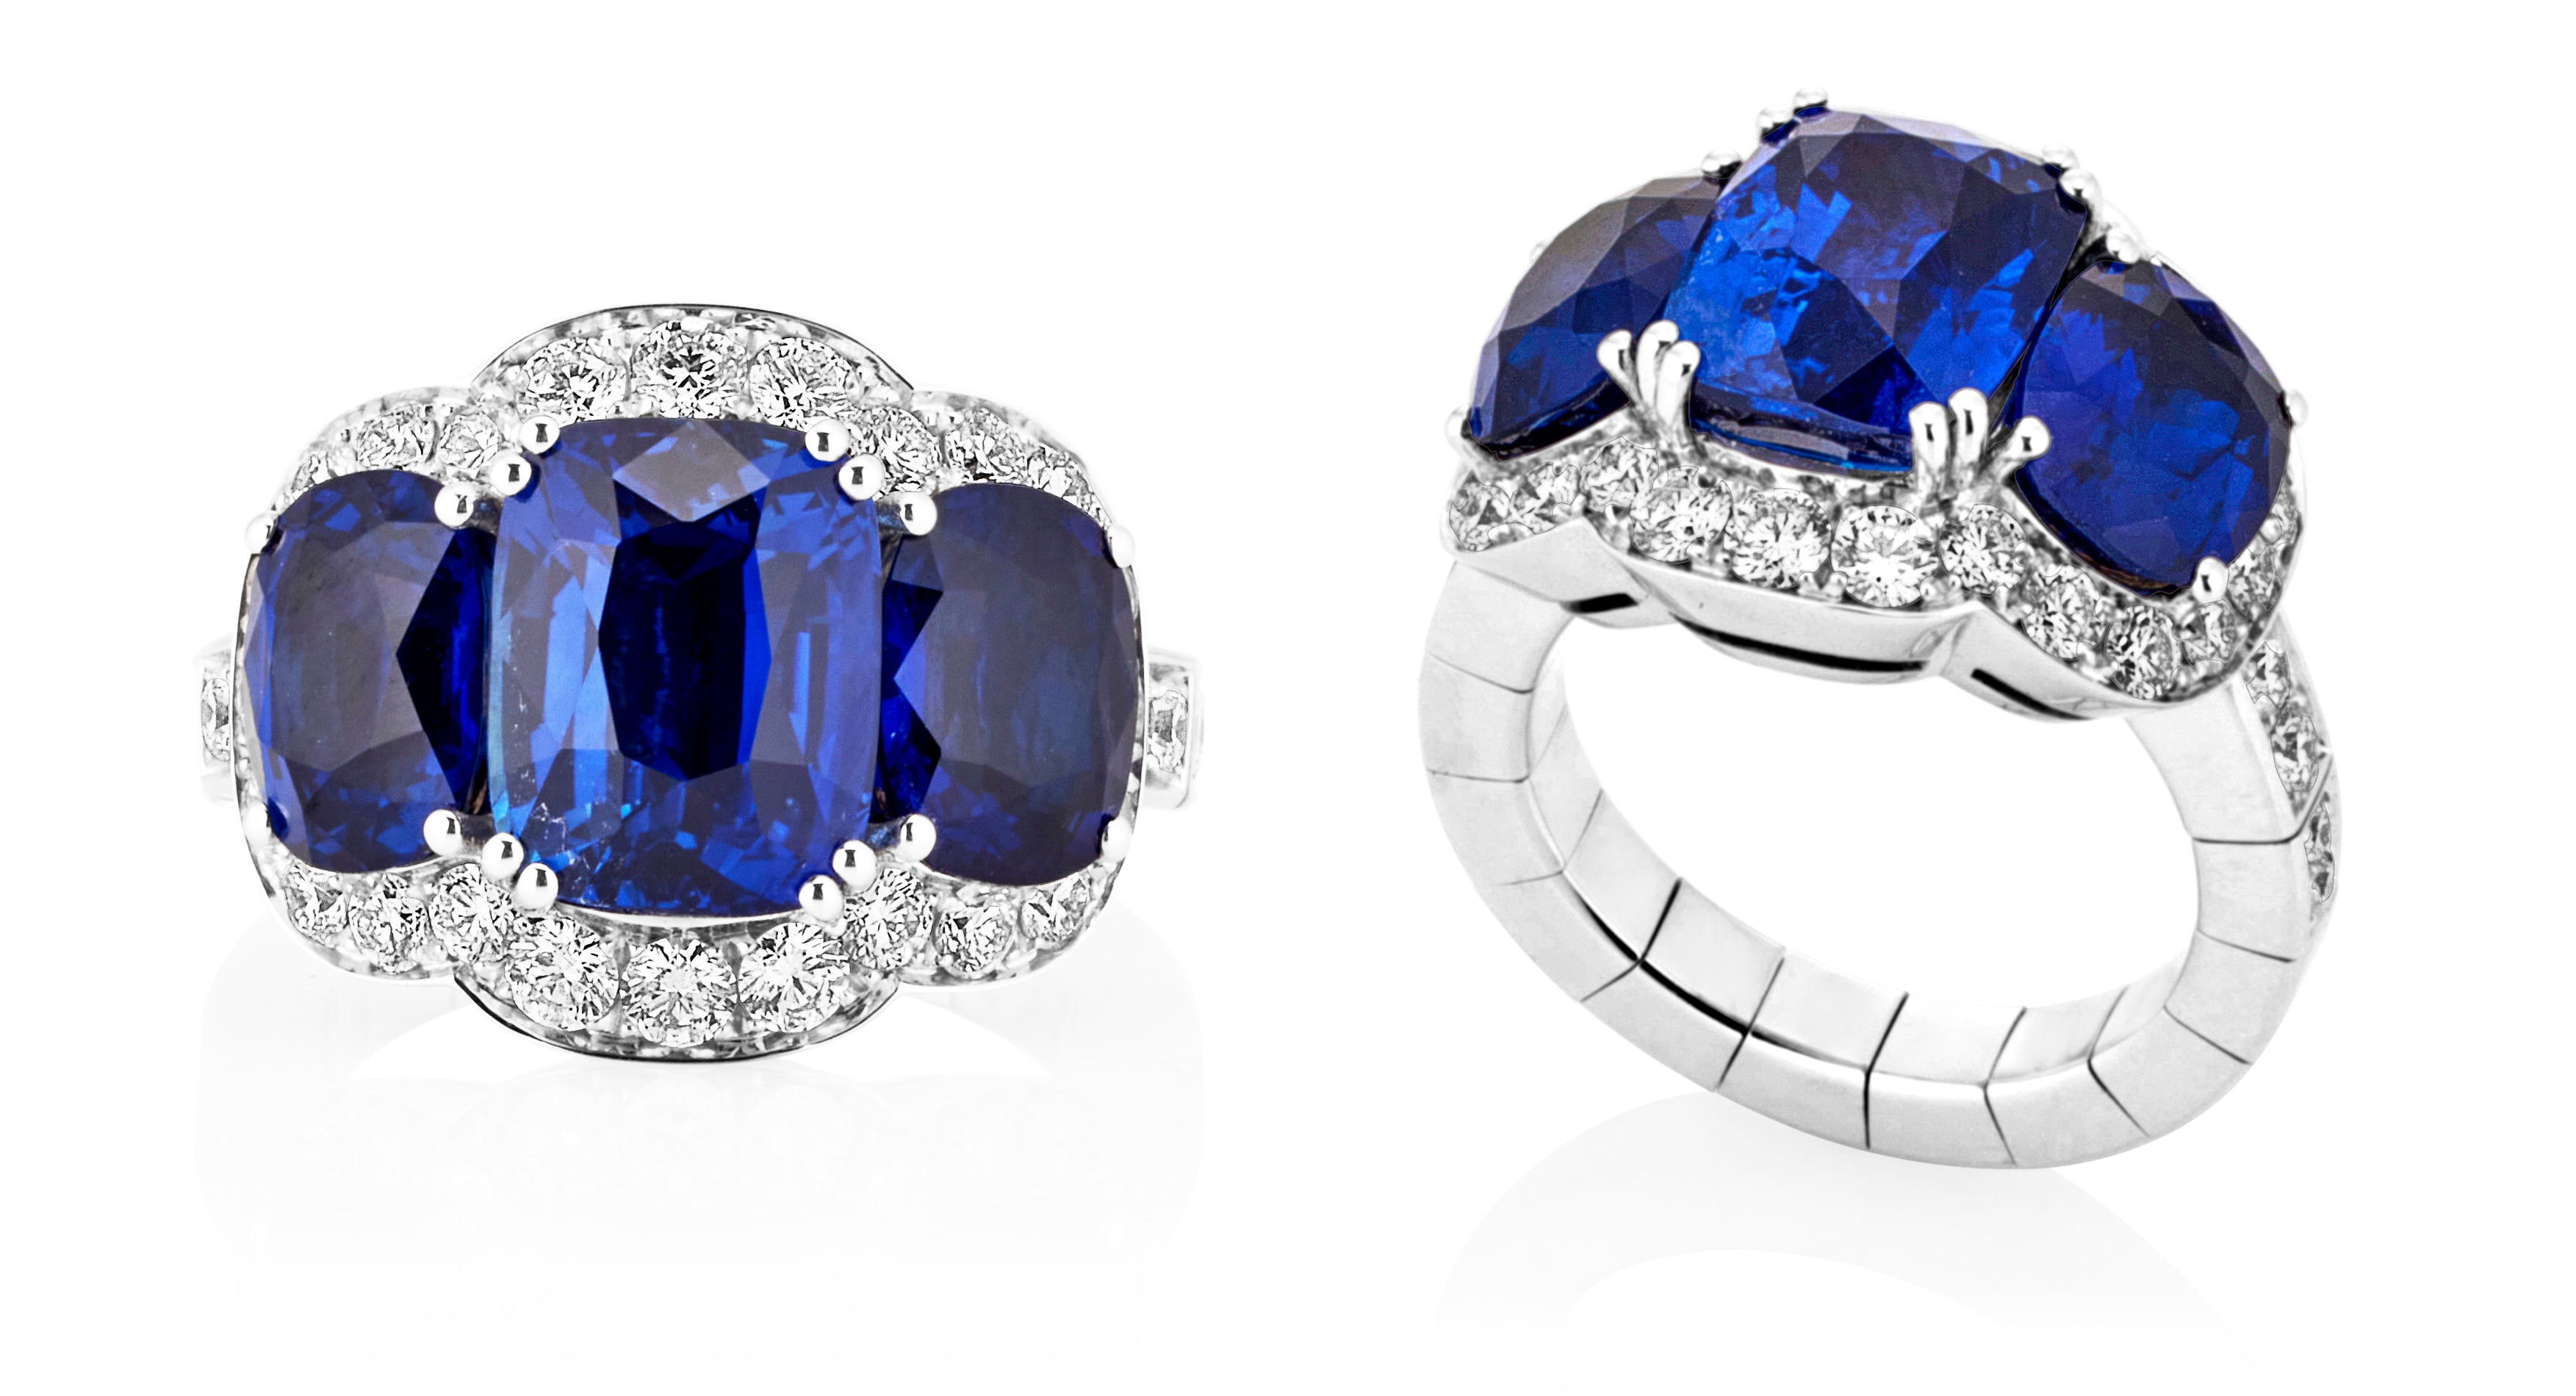 Picchiotti Ceylon sapphire ring, front and side